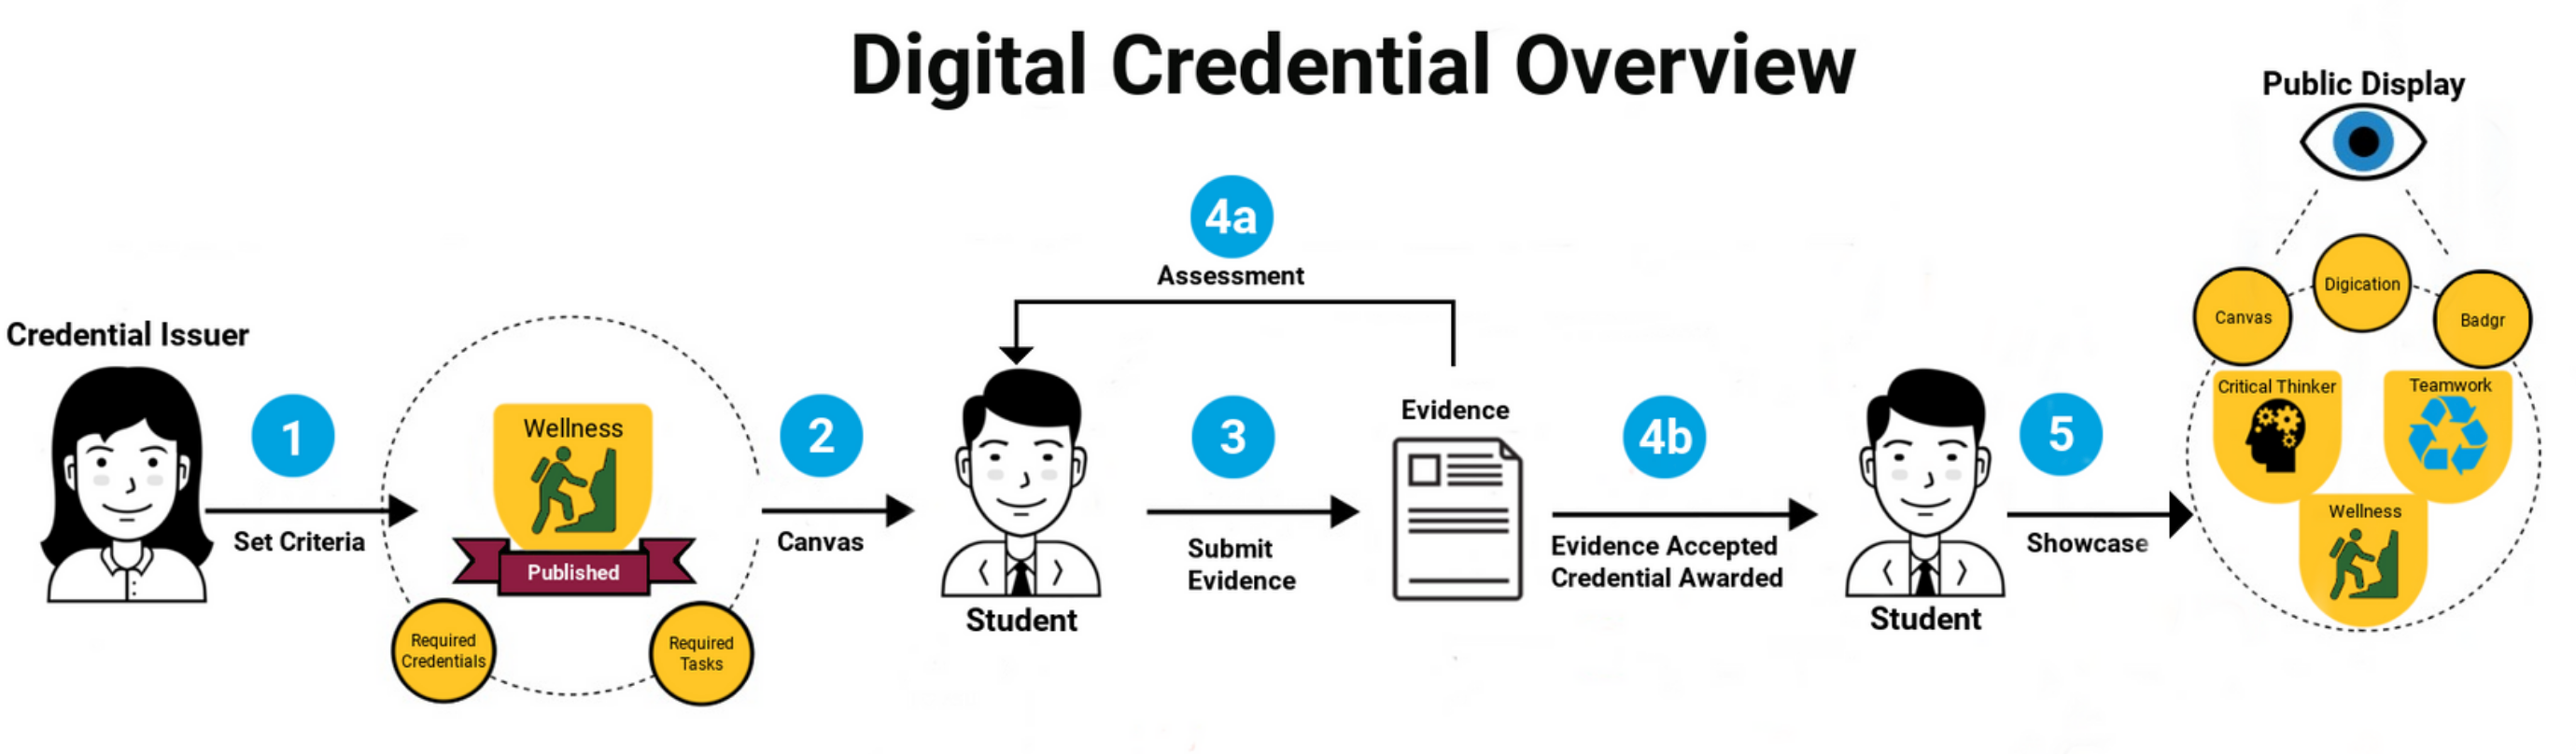 Digital Credential Overview